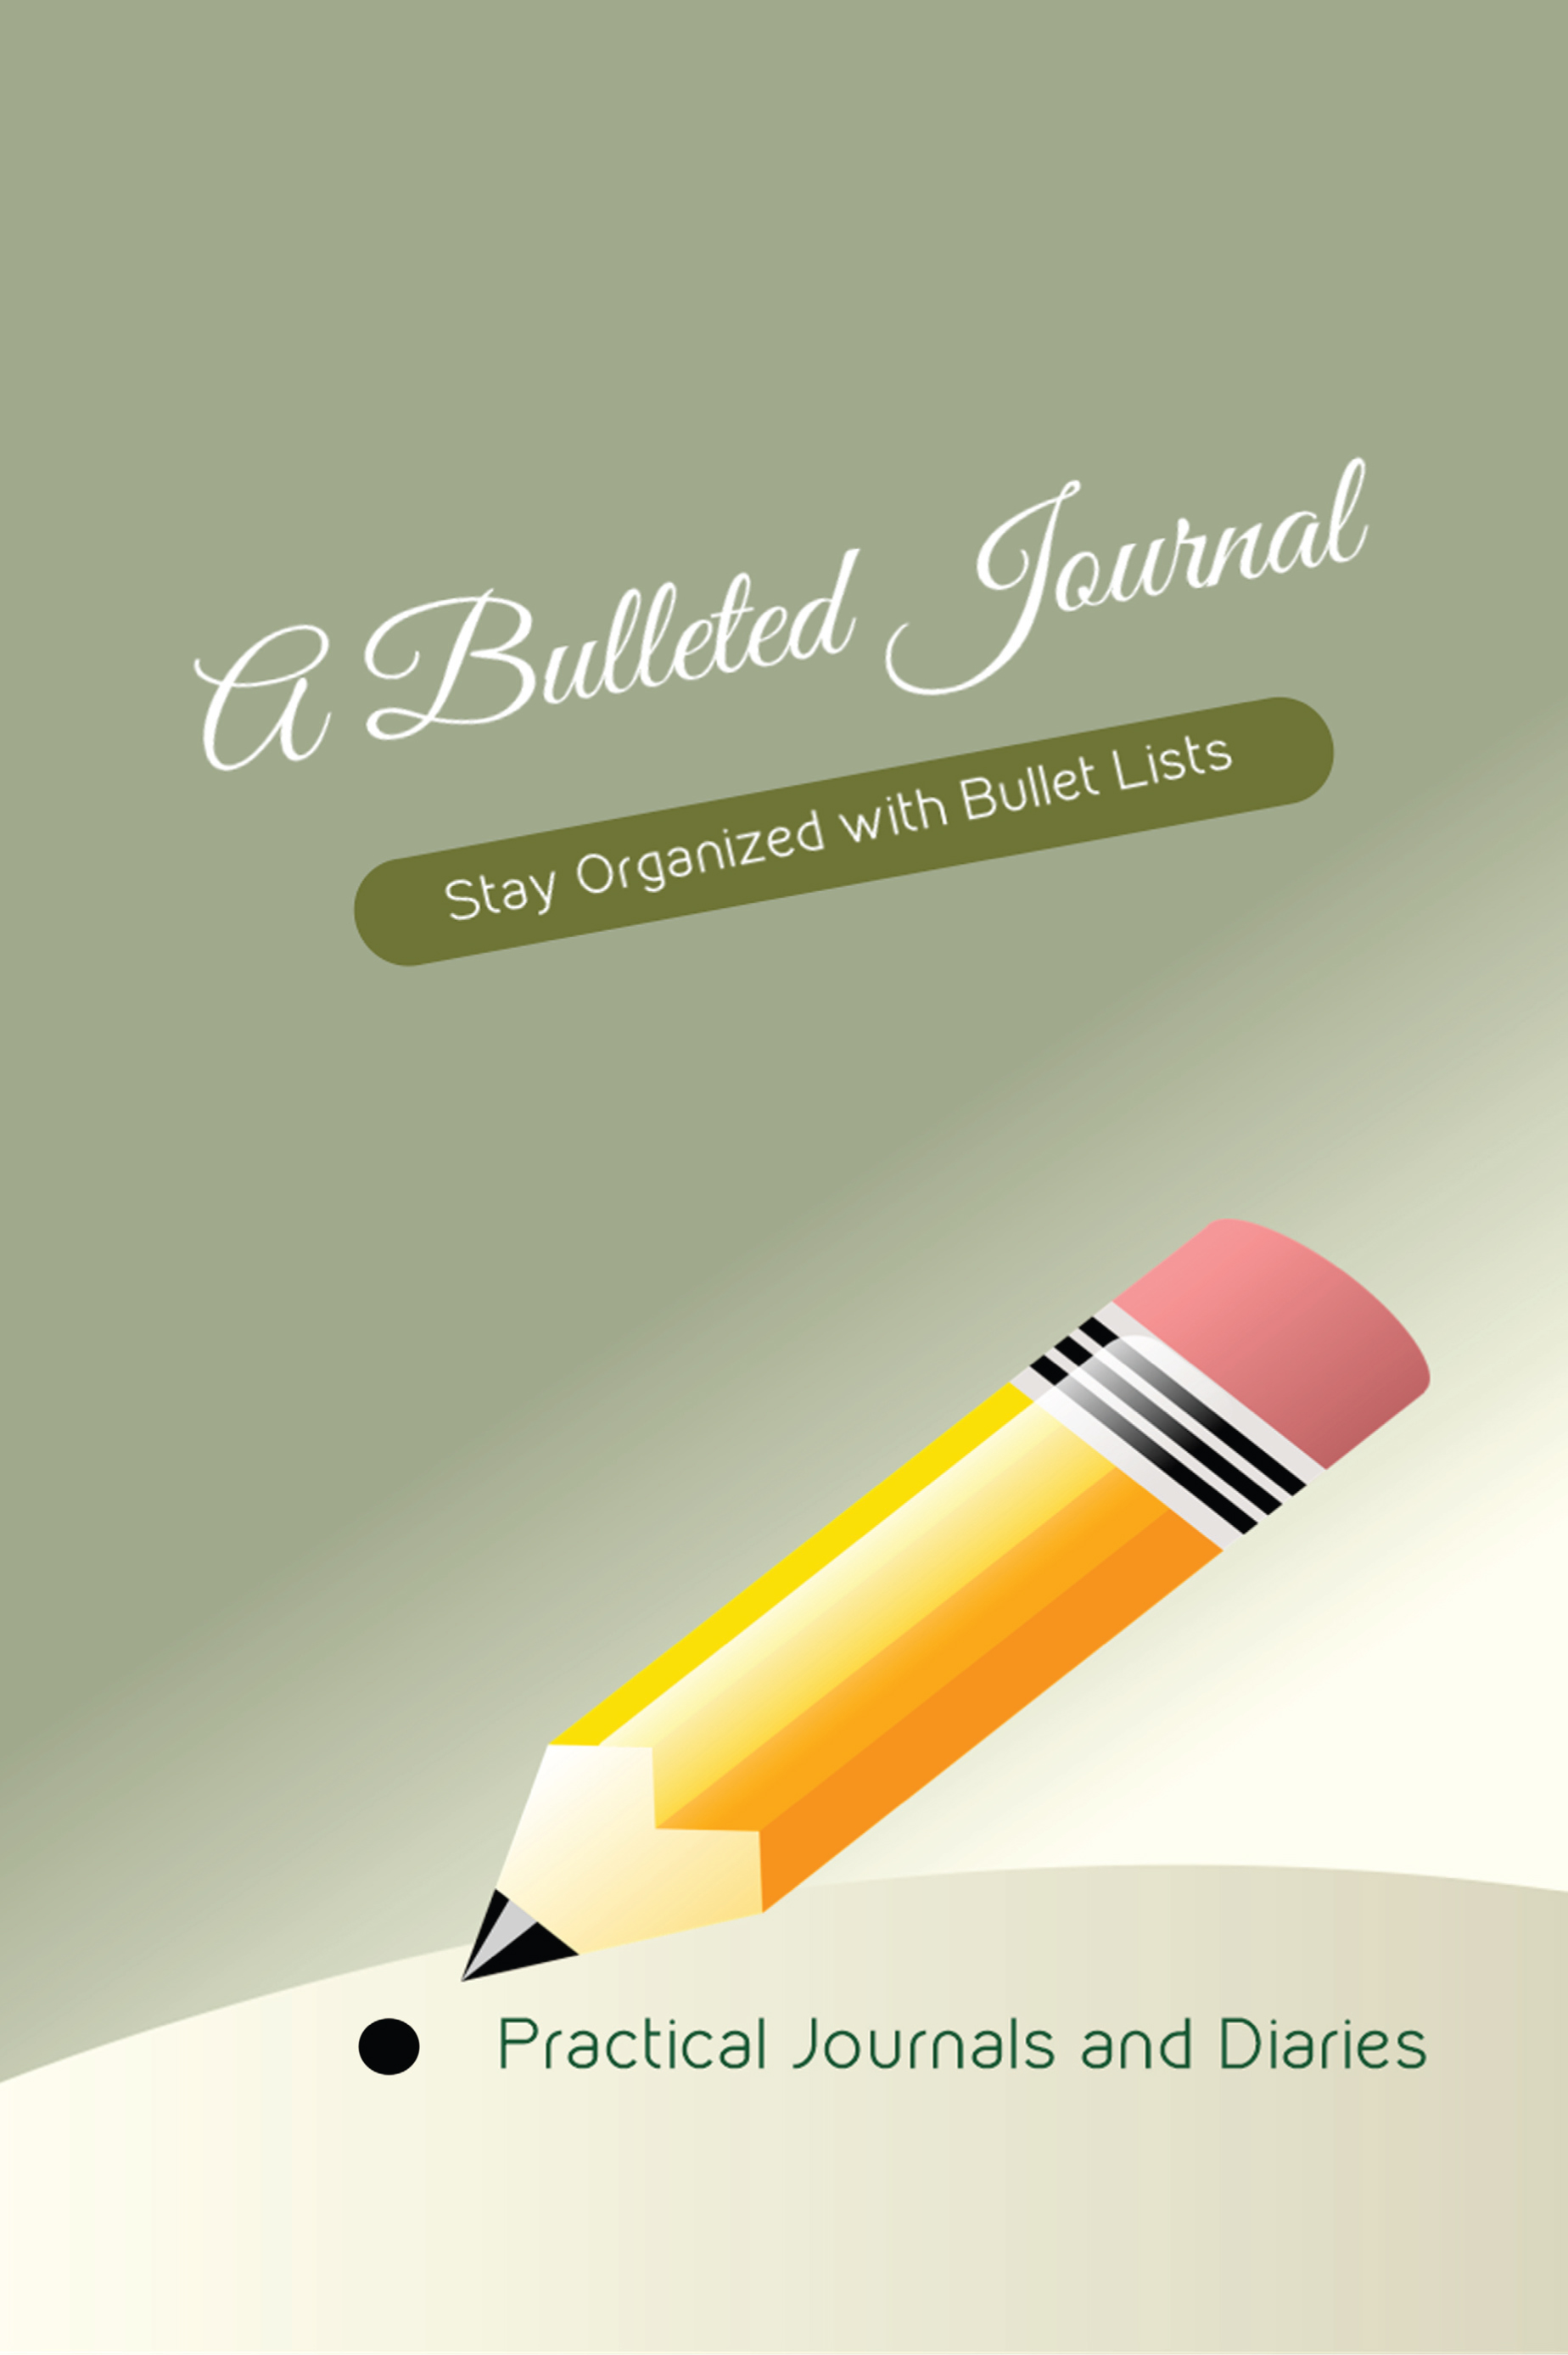 A Bulleted Journal cover